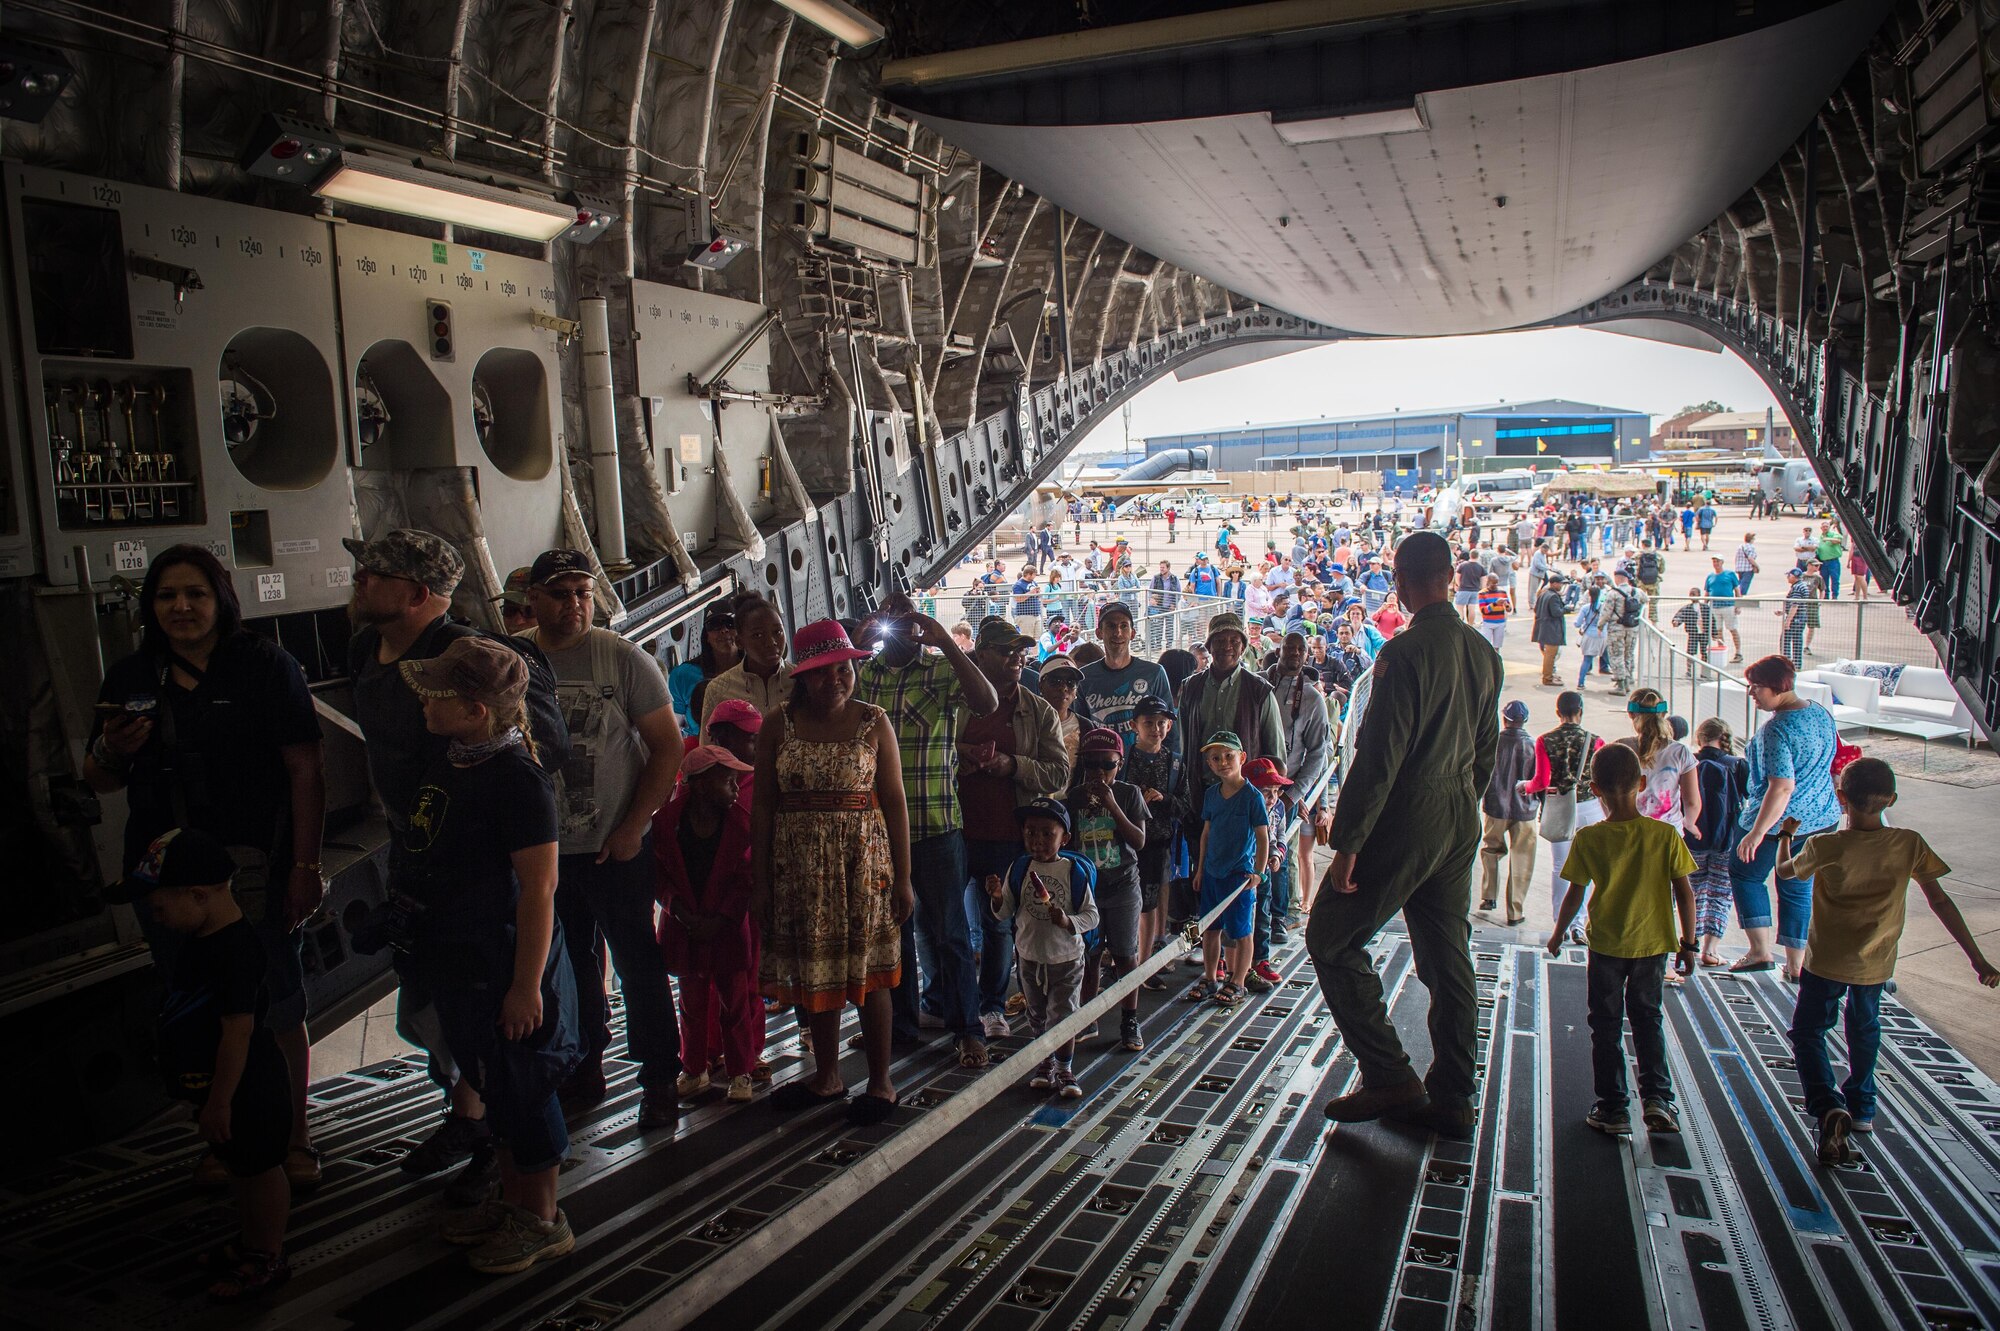 Hundreds of people line up to tour the inside of a C-17, the largest aircraft on display at the Africa Aerospace and Defense Expo at Waterkloof Air Force Base, South Africa, Sept. 17, 2016. The U.S. military is exhibiting a C-17 Globemaster III, a KC-135 Stratotanker, a C-130J Super Hercules, an HC-130 King, and an MQ-9 Reaper. The aircraft come from various Air National Guard and Air Force Reserve Command units. The U.S. routinely participates in events like AADE to strengthen partnerships with regional partners. (U.S. Air Force photo by Tech. Sgt. Ryan Crane)